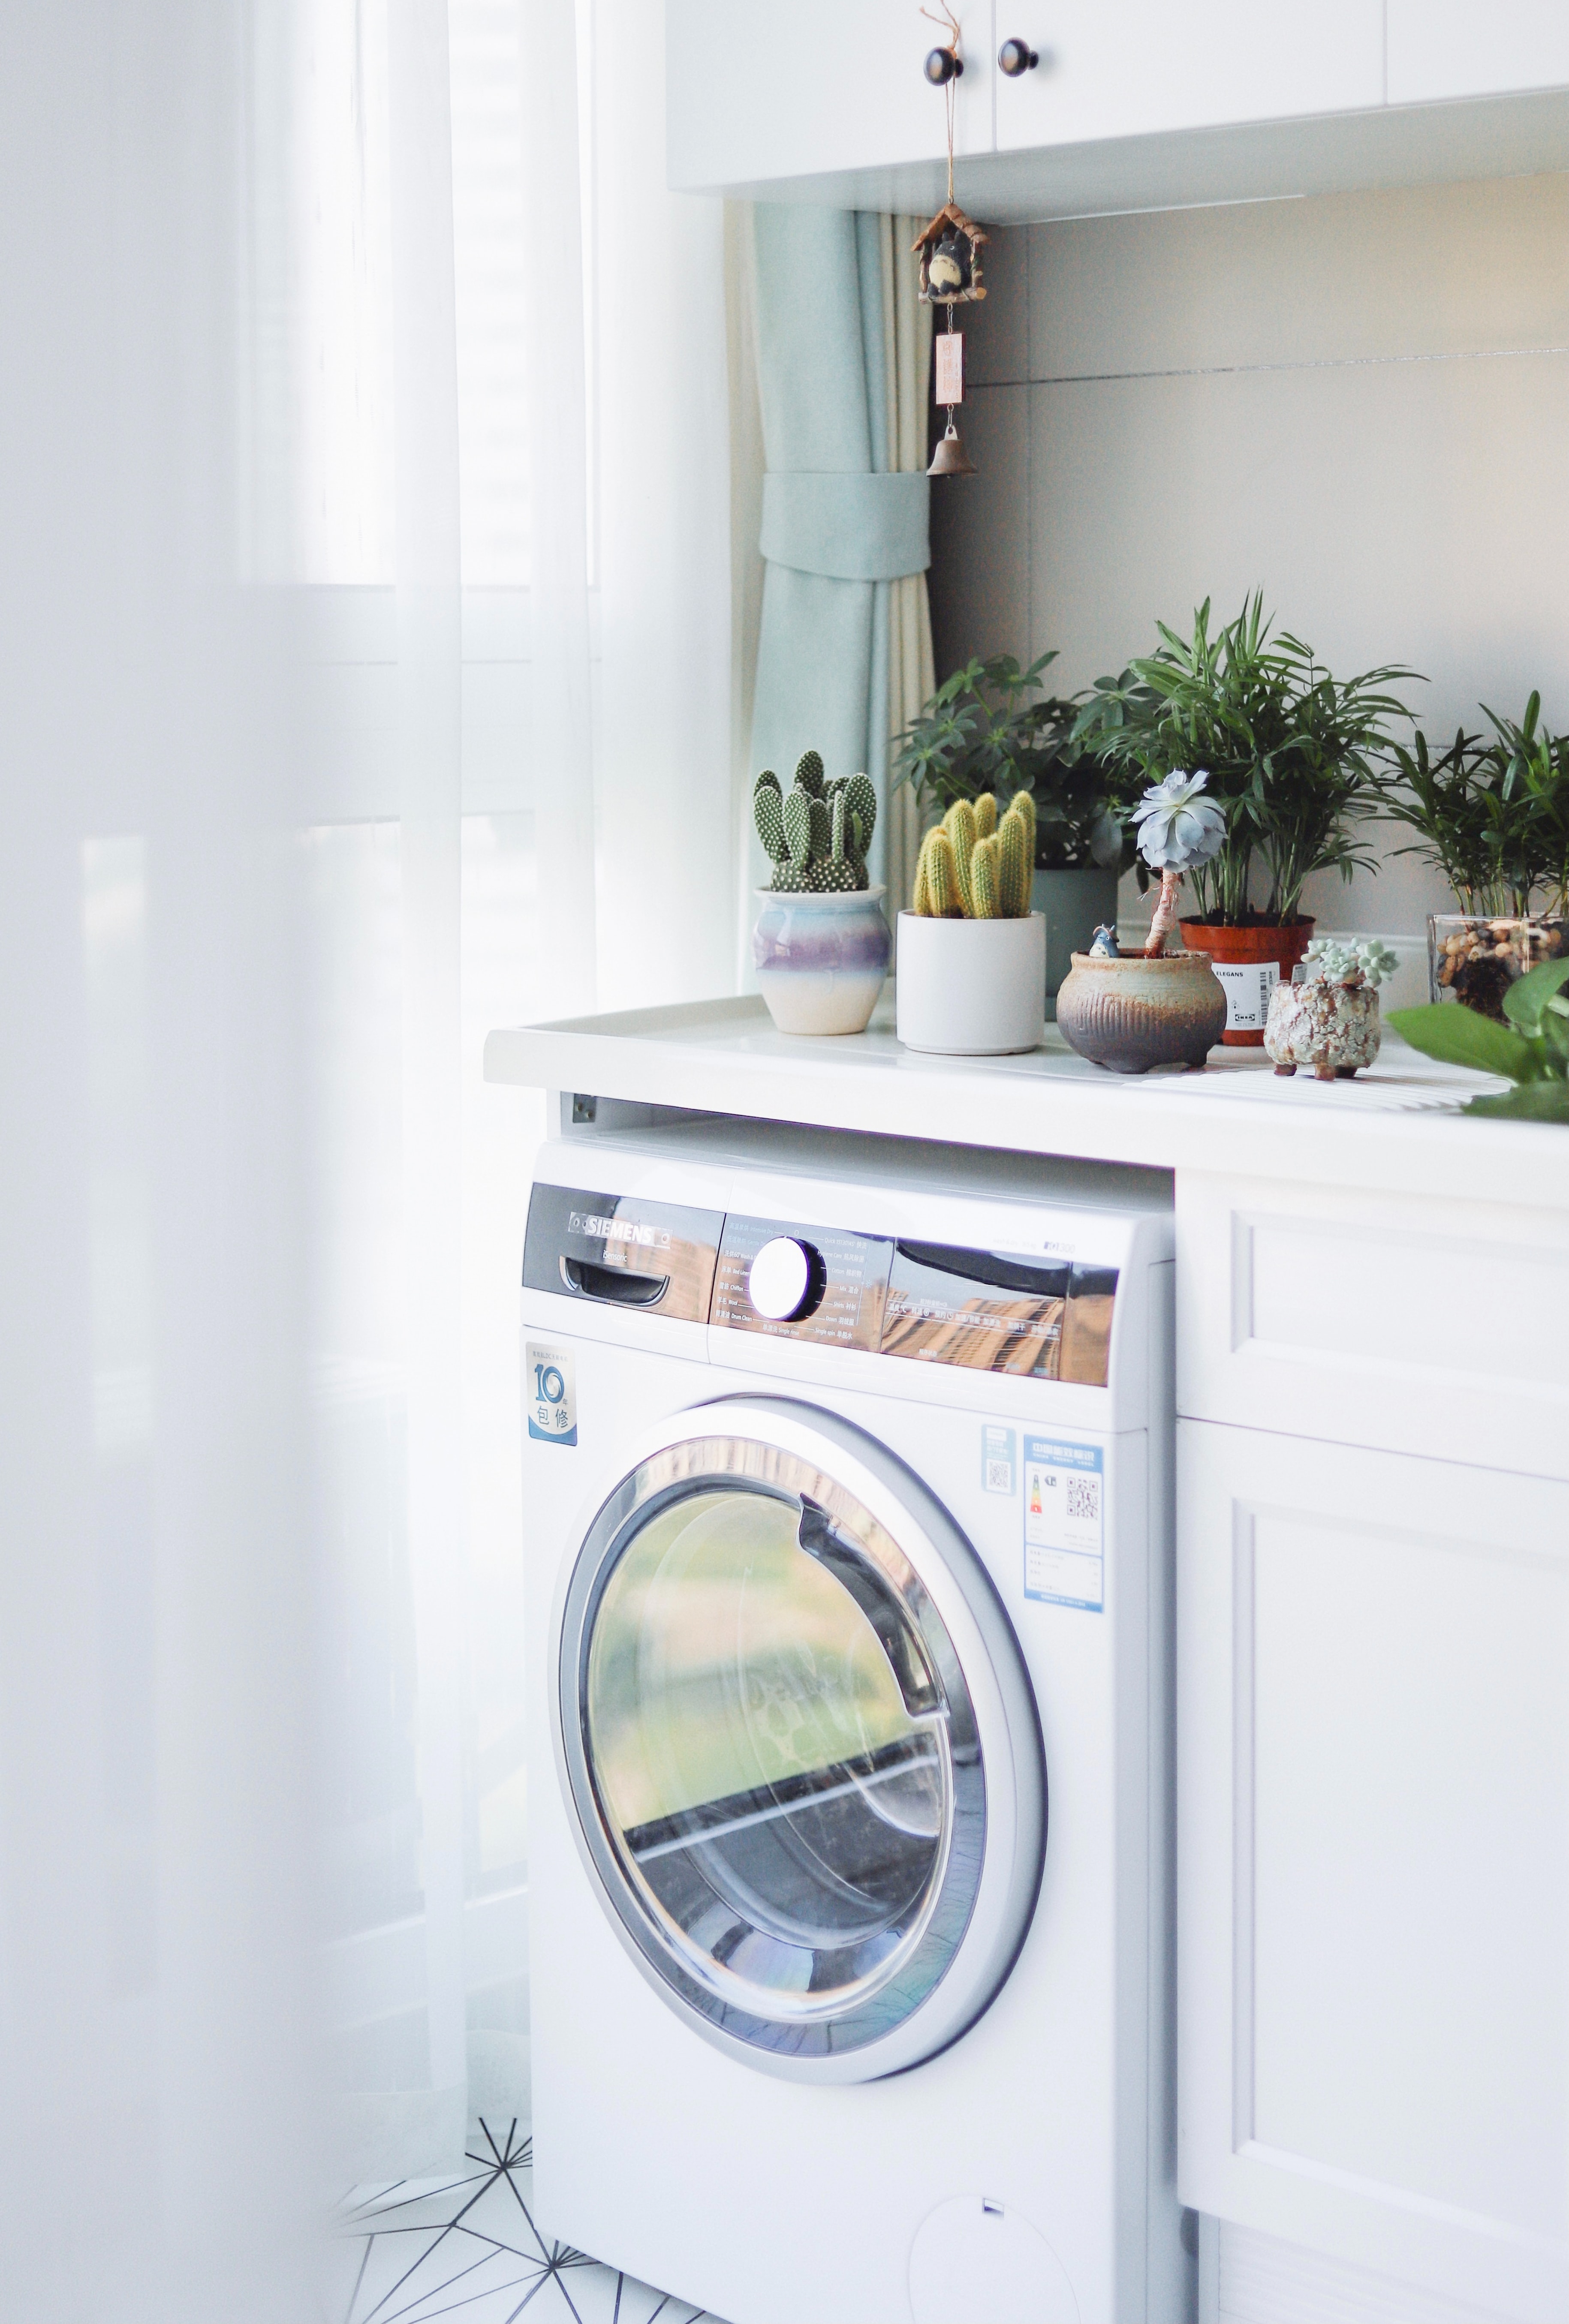 How Much Does A Washer Dryer Hookup Cost?